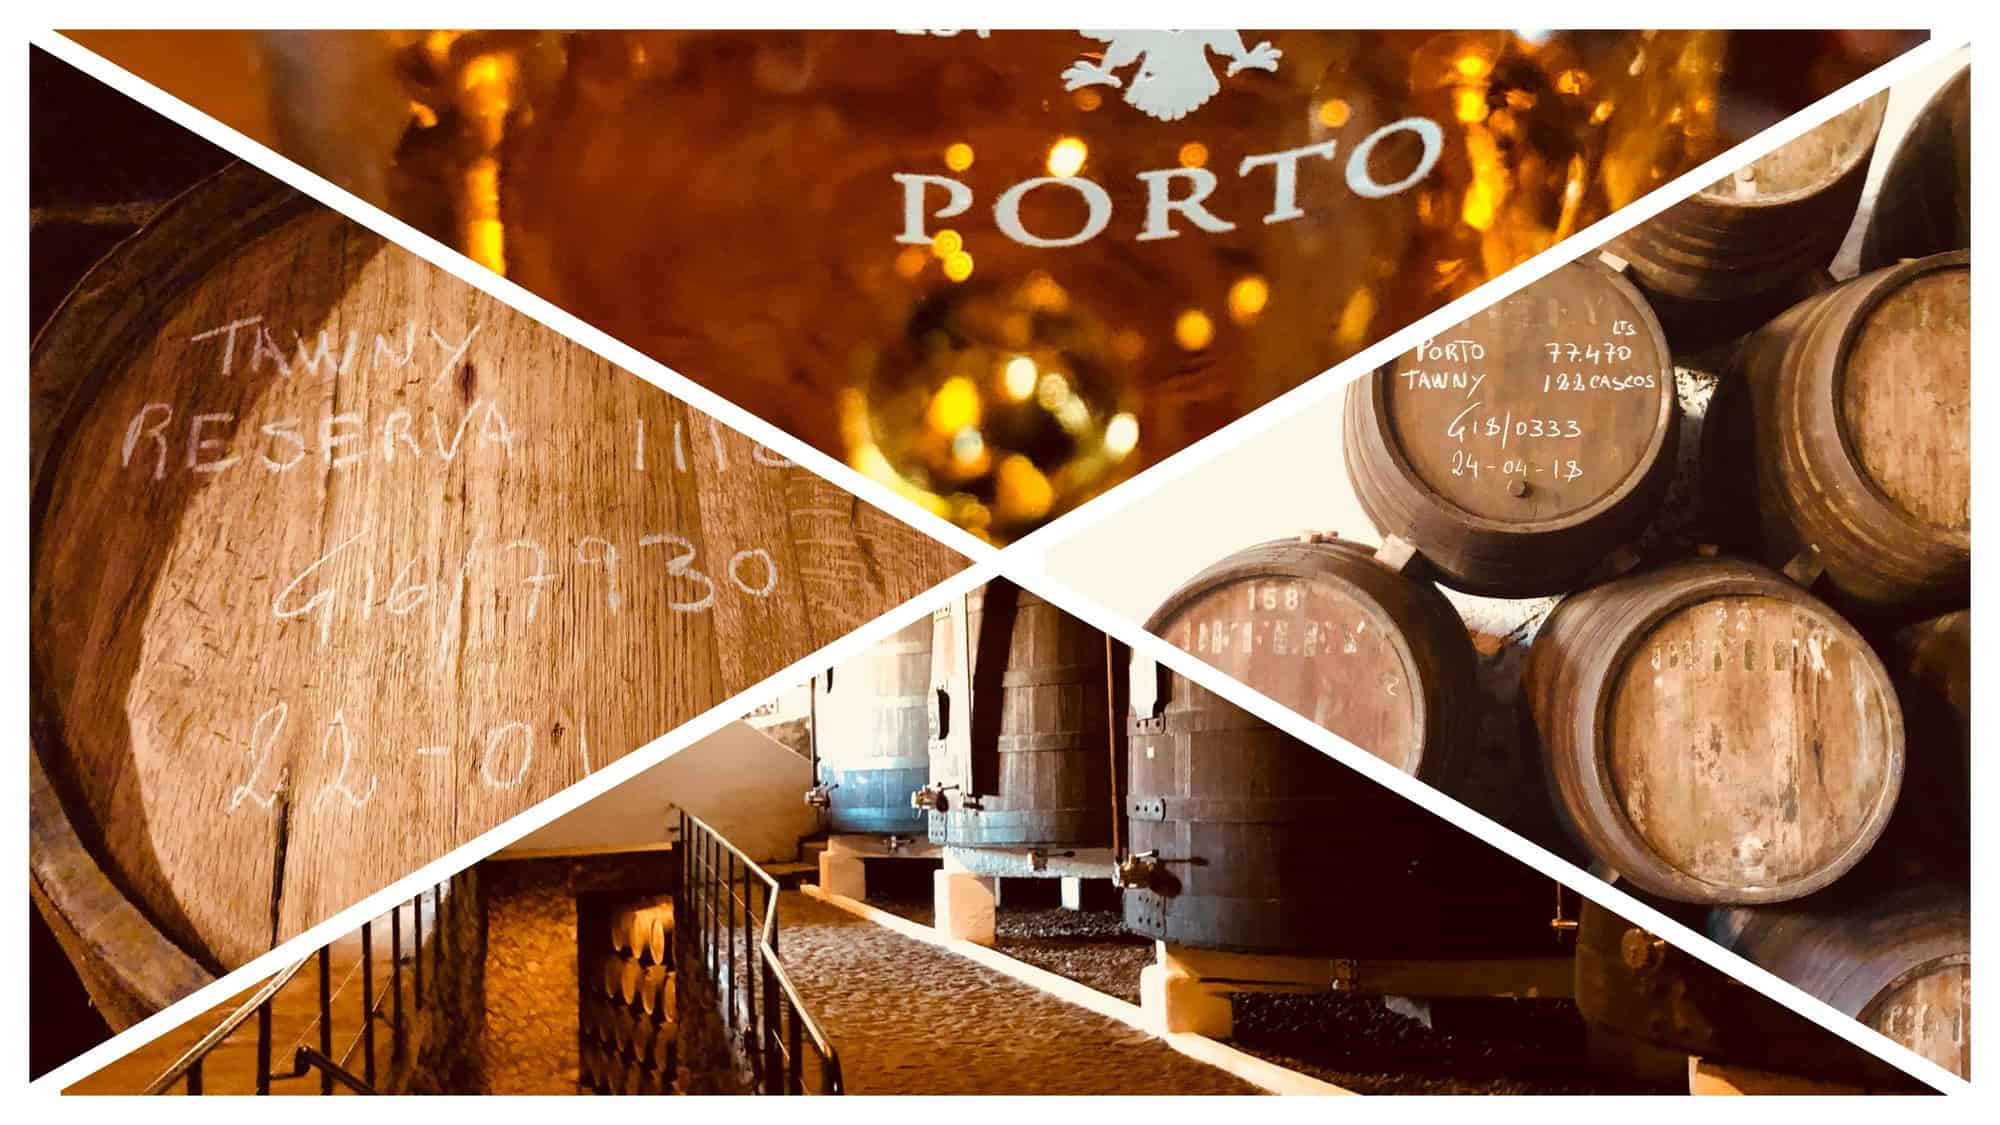 Port Tasting - Unusual things to do in Porto